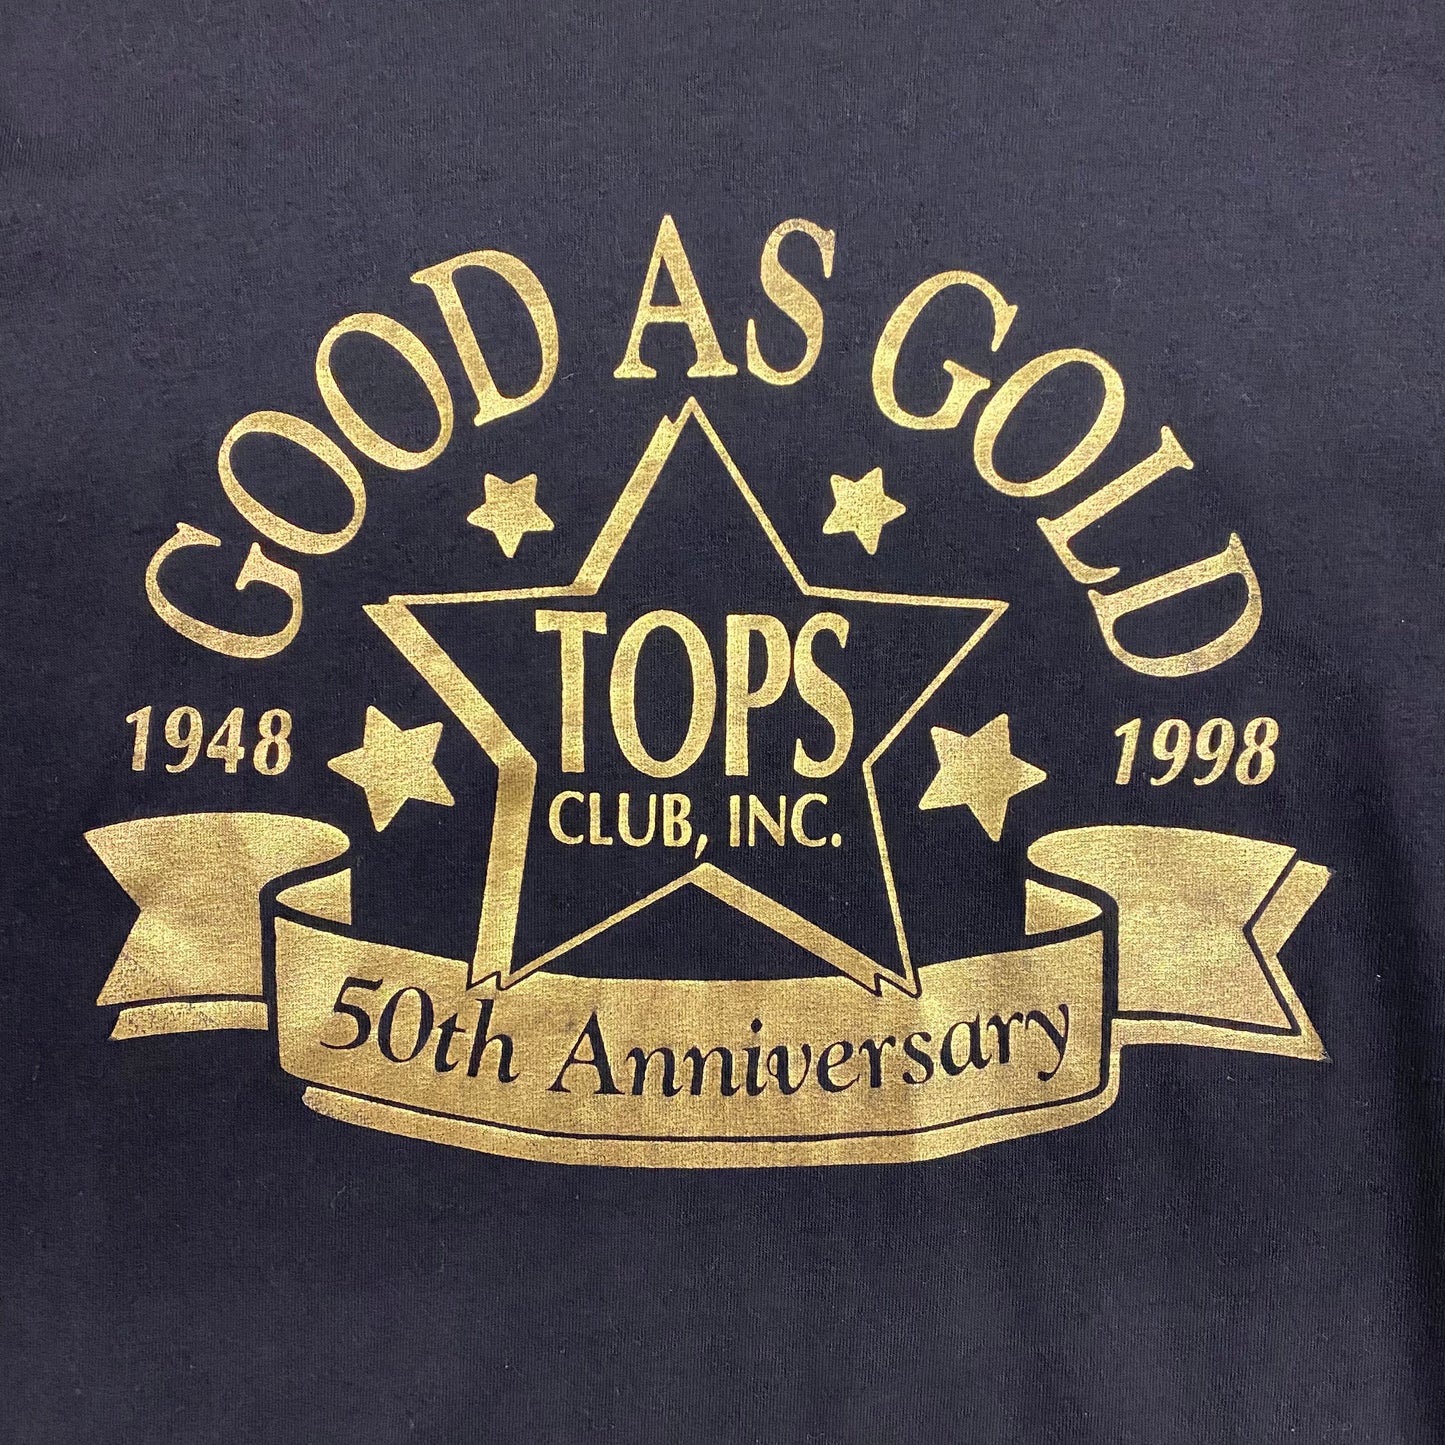 1998 Tops Club, Inc. 50th Anniversary Tee - Size Large